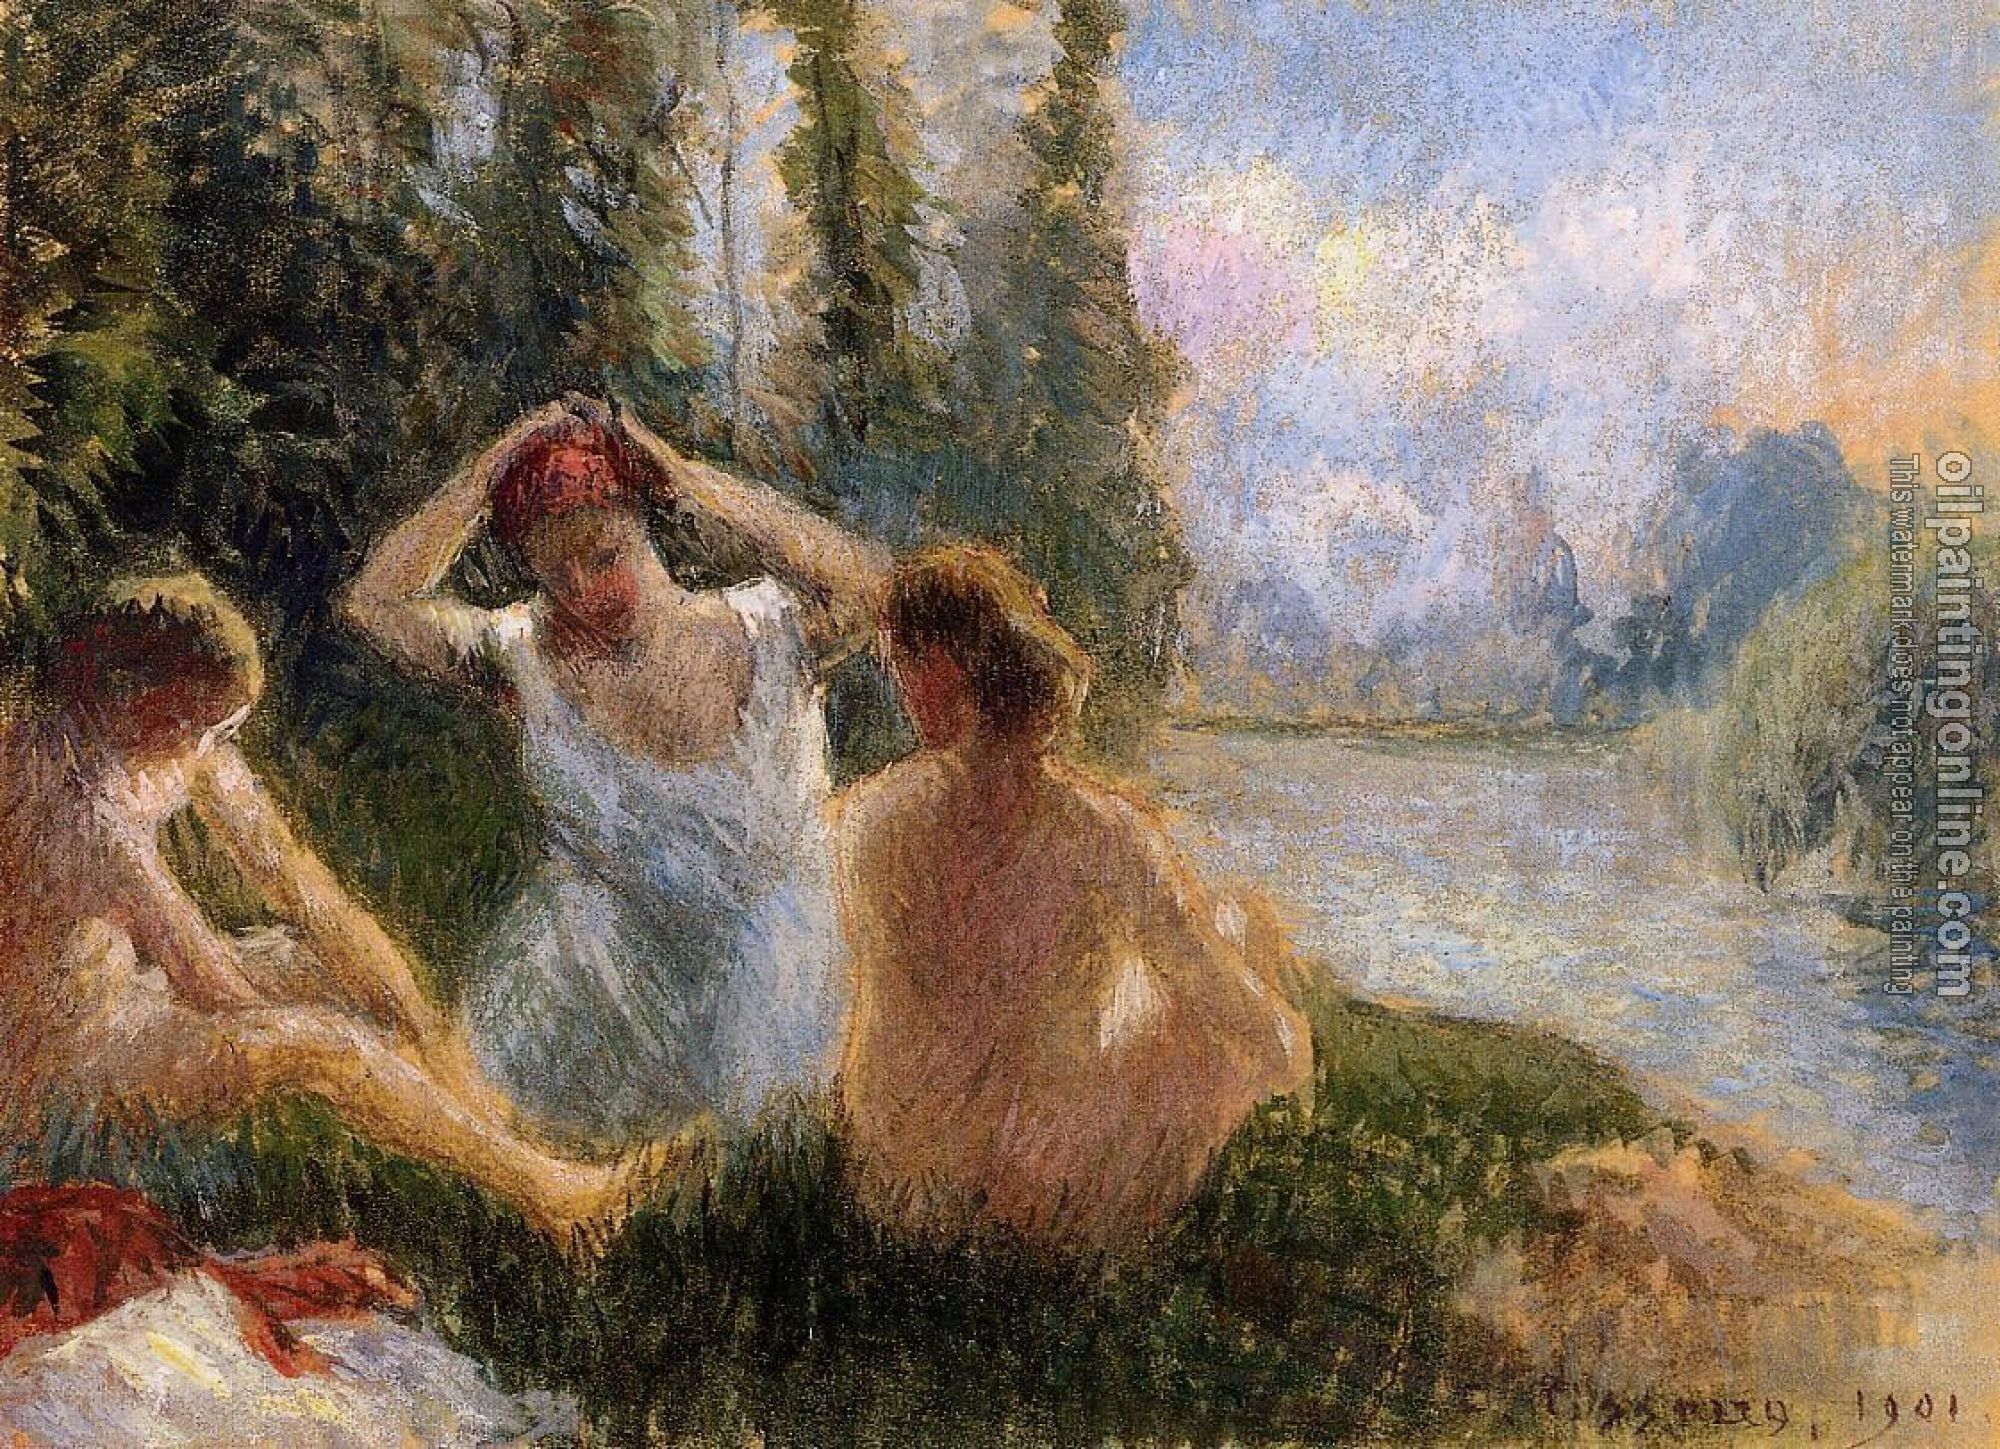 Pissarro, Camille - Bathers Seated on the Banks of a River